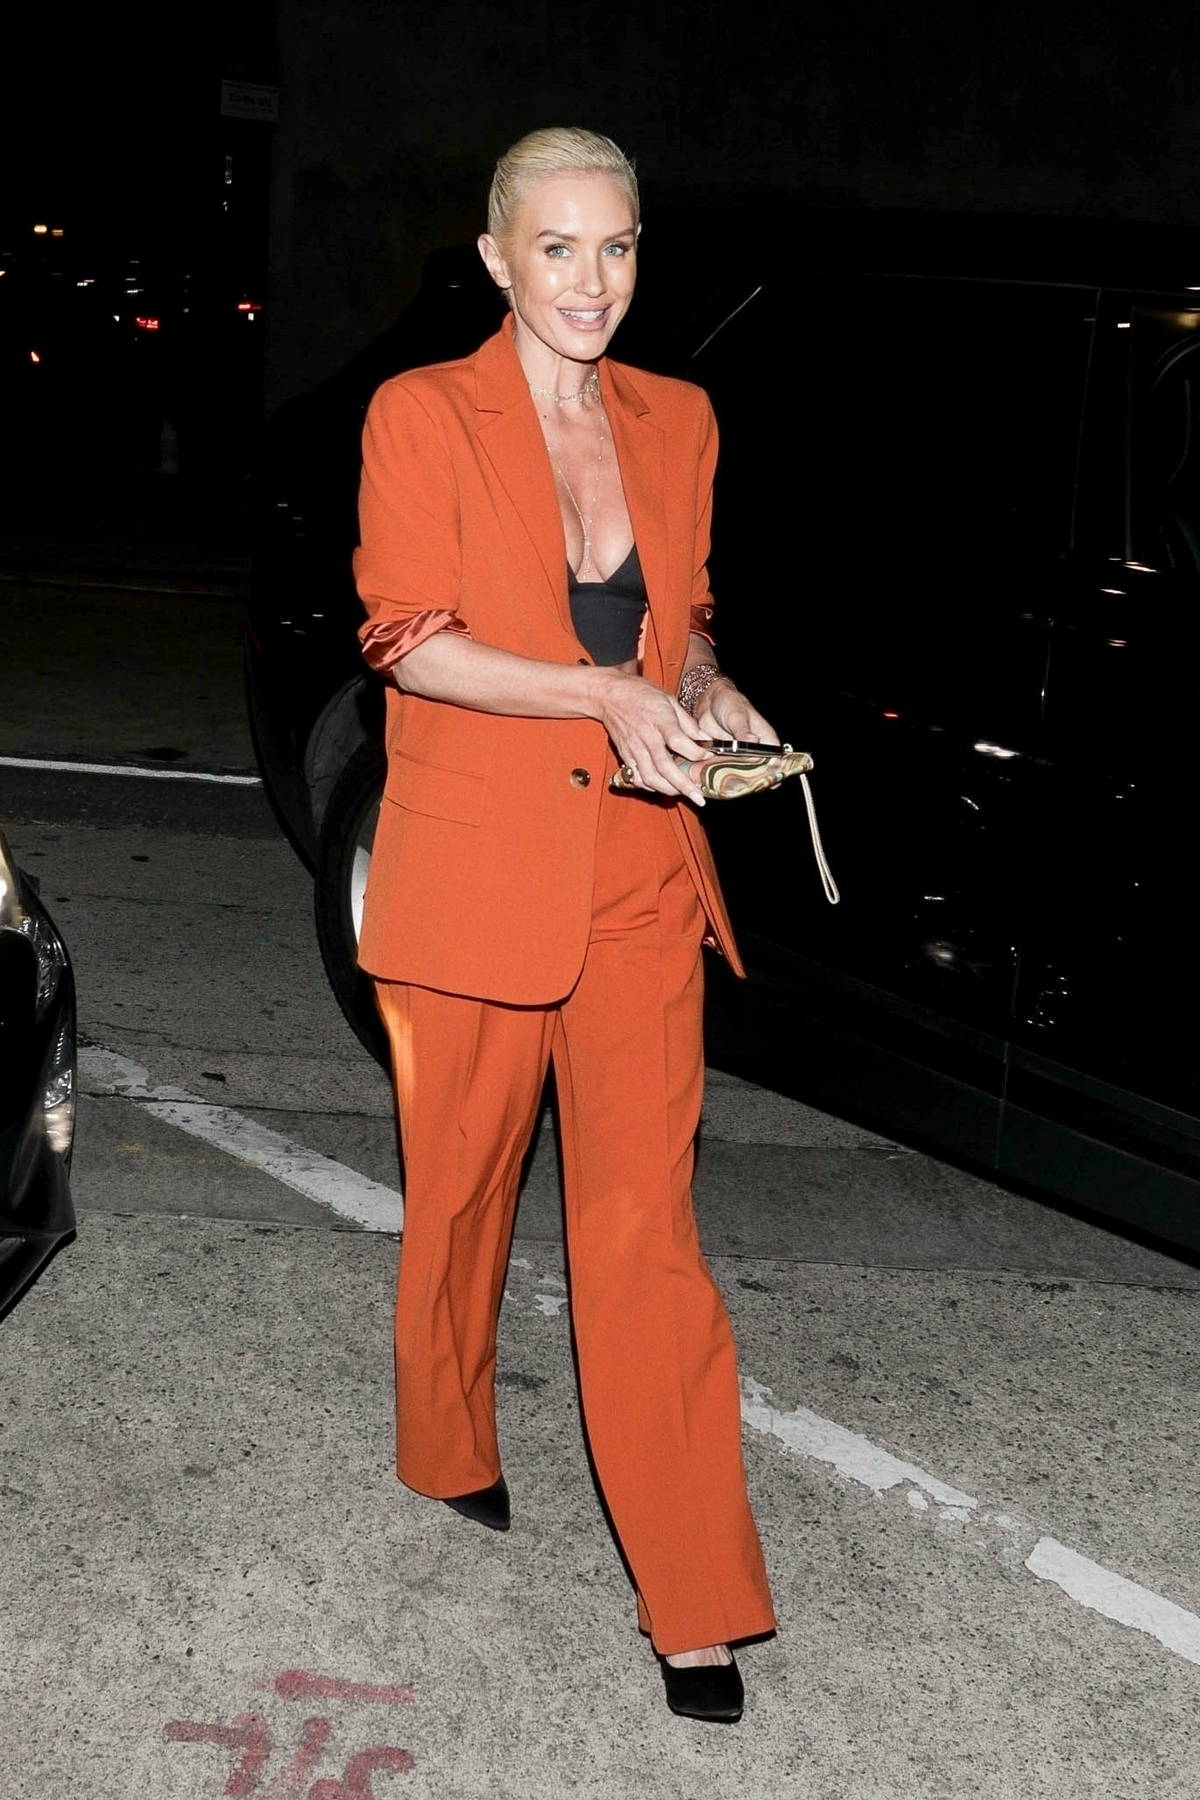 https://www.celebsfirst.com/wp-content/uploads/2023/01/nicky-whelan-looks-good-in-an-orange-pantsuit-as-she-steps-out-for-dinner-at-craigs-in-west-hollywood-california-220123_3.jpg